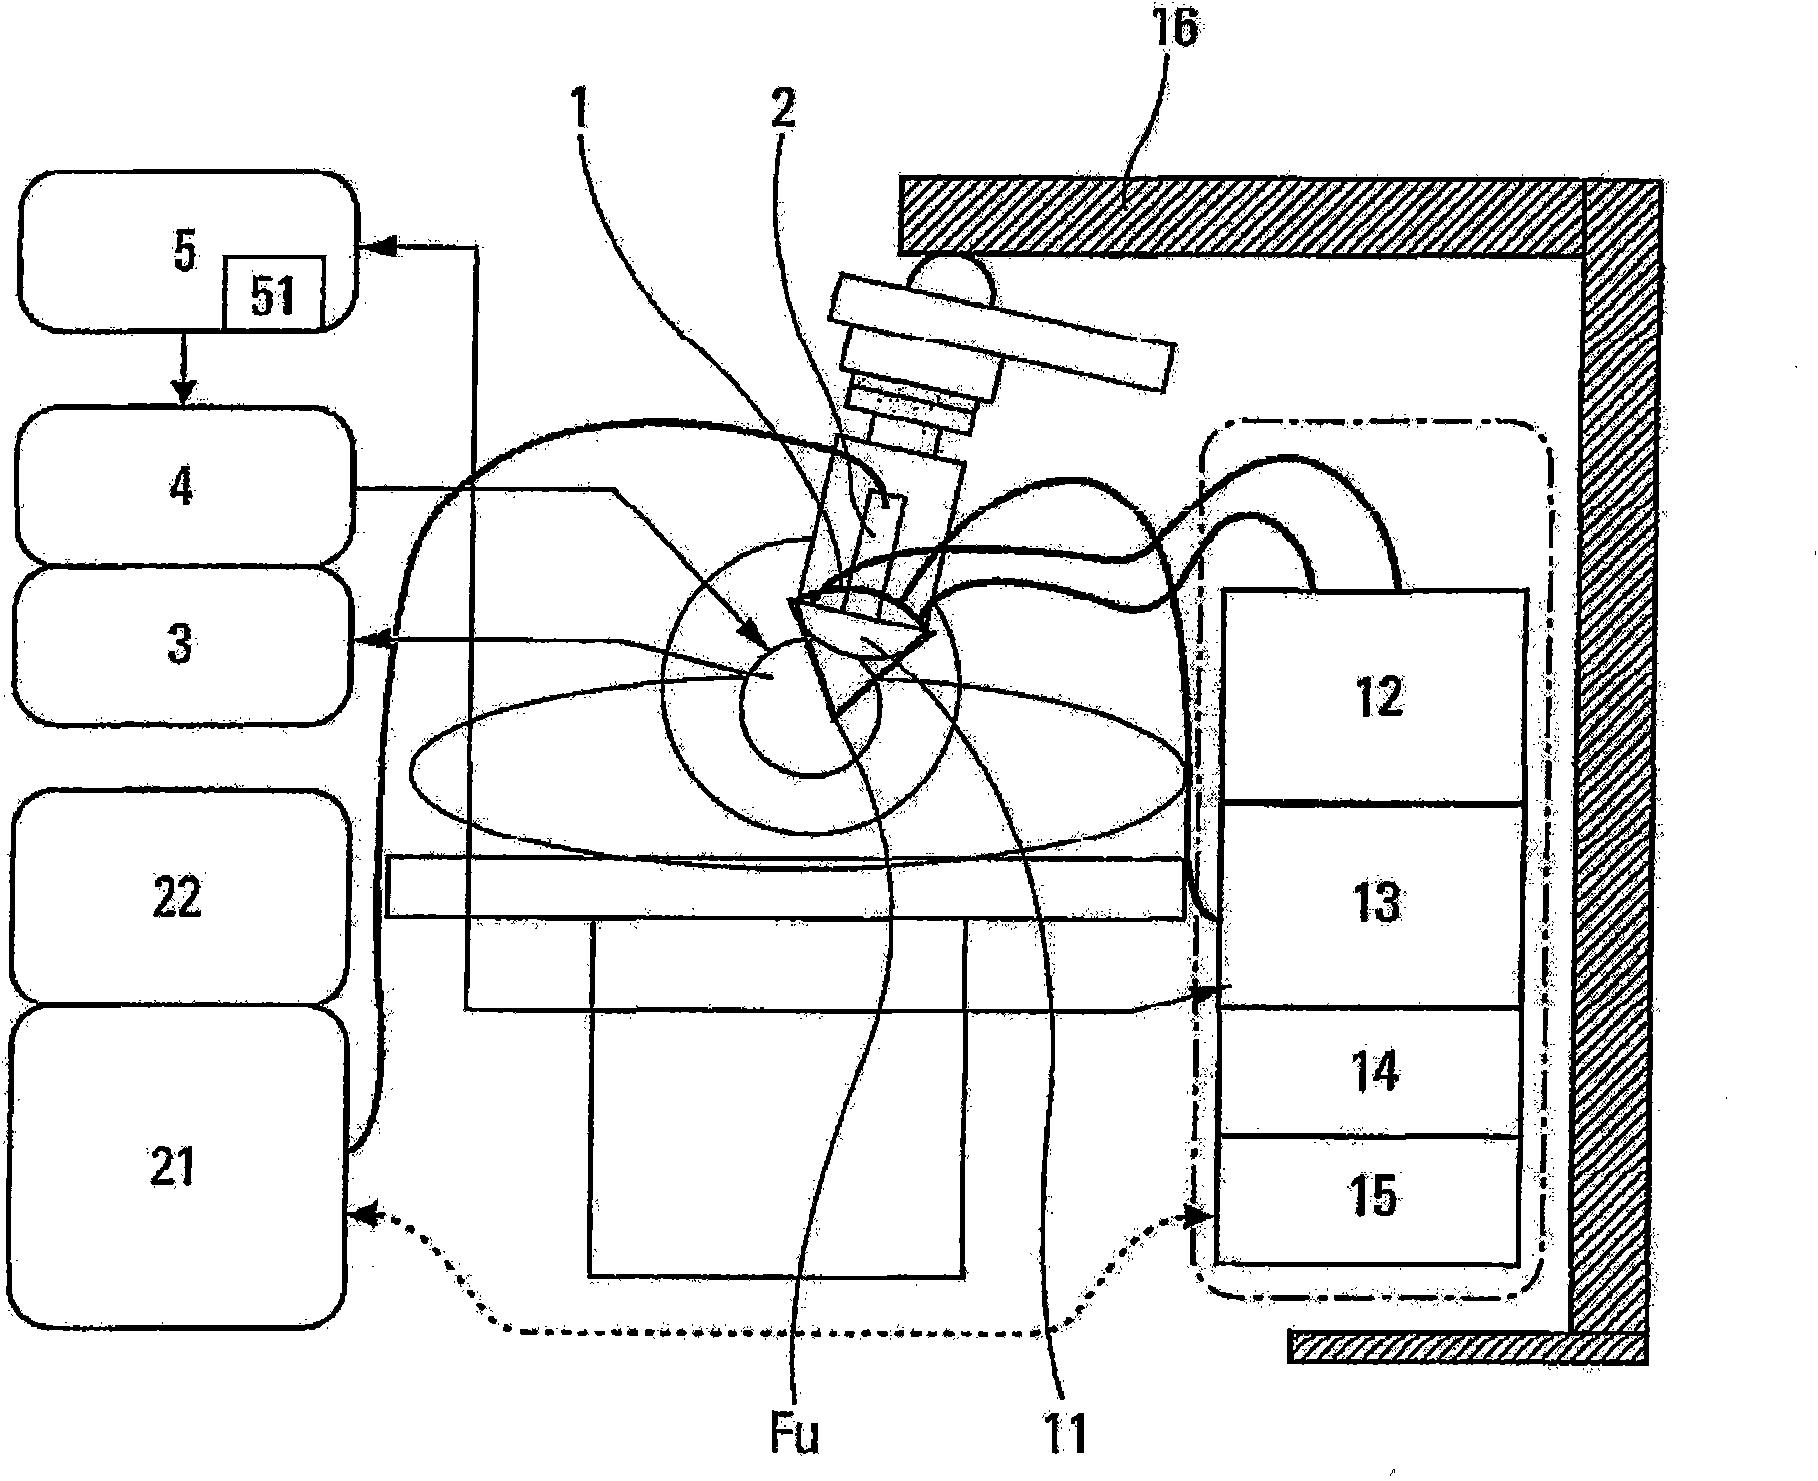 Non-invasive device and method for locating a structure such as a nerve